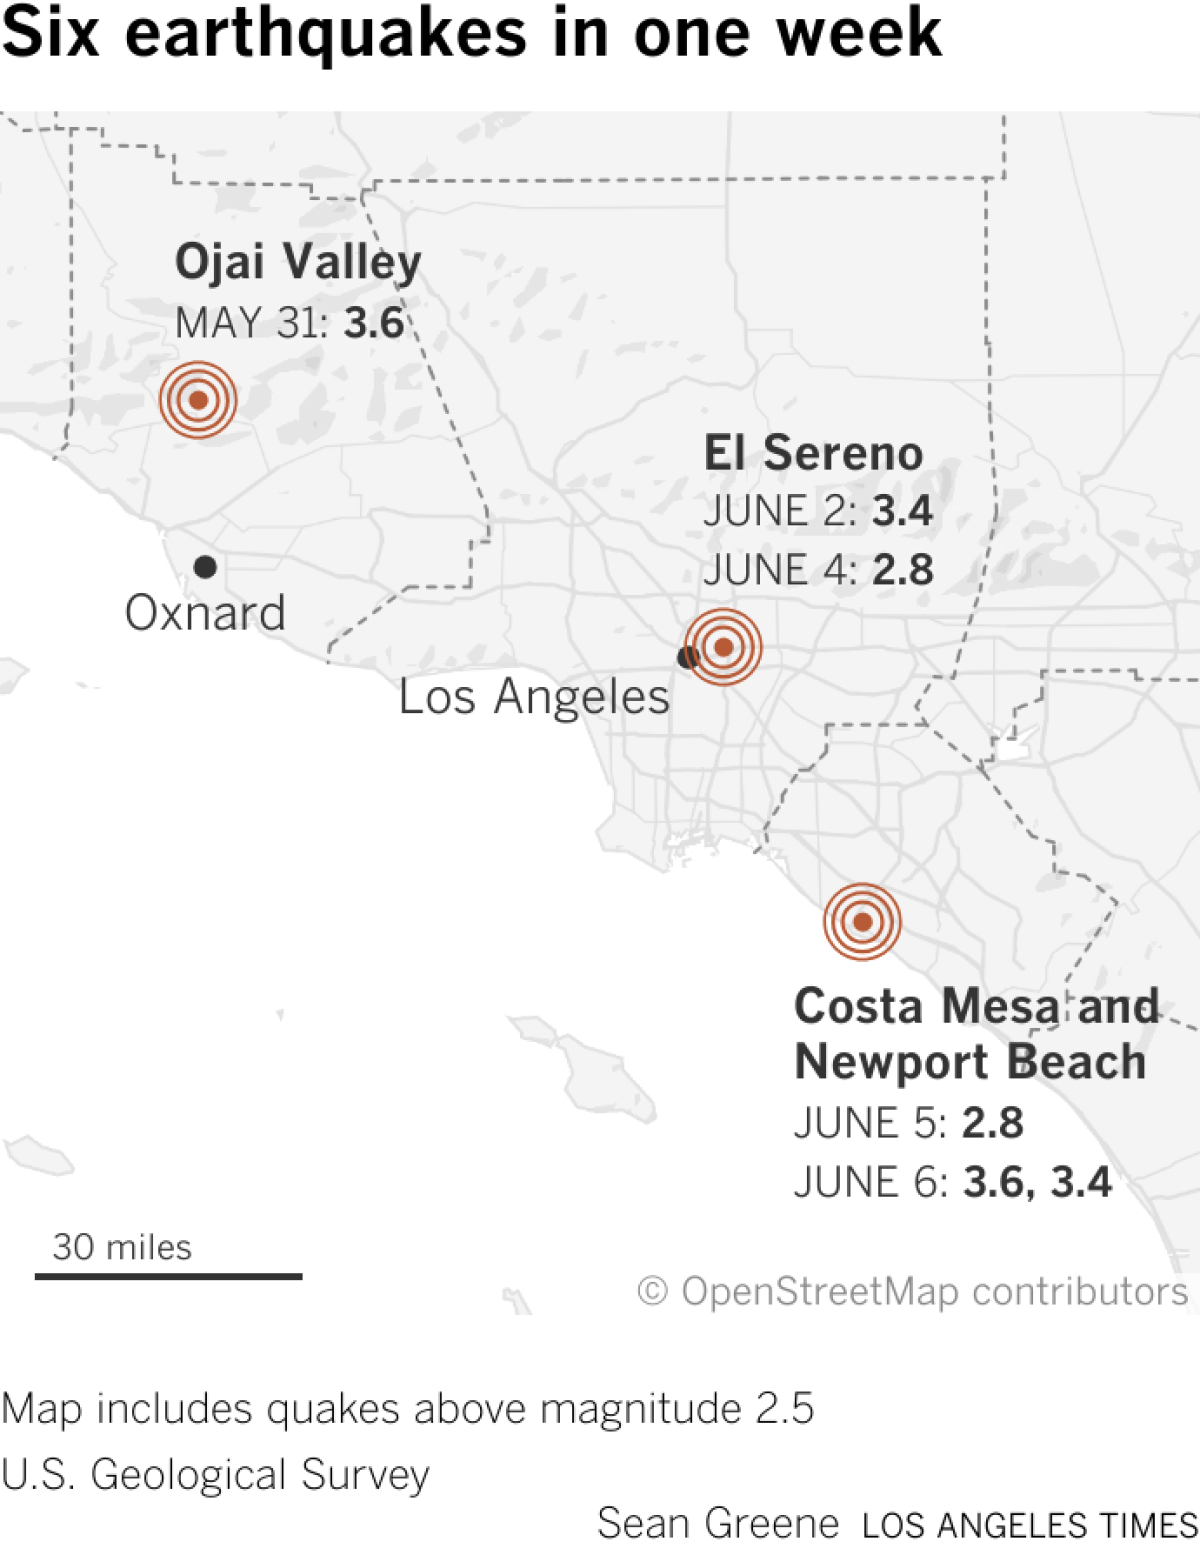 A map shows the locations of six small earthquakes in the Southern California area in just a week's timeframe: in the Ojai Valley of Ventura County, the eastern L.A. neighborhood of El Sereno, and in the Costa Mesa-Newport Beach area of Orange County.